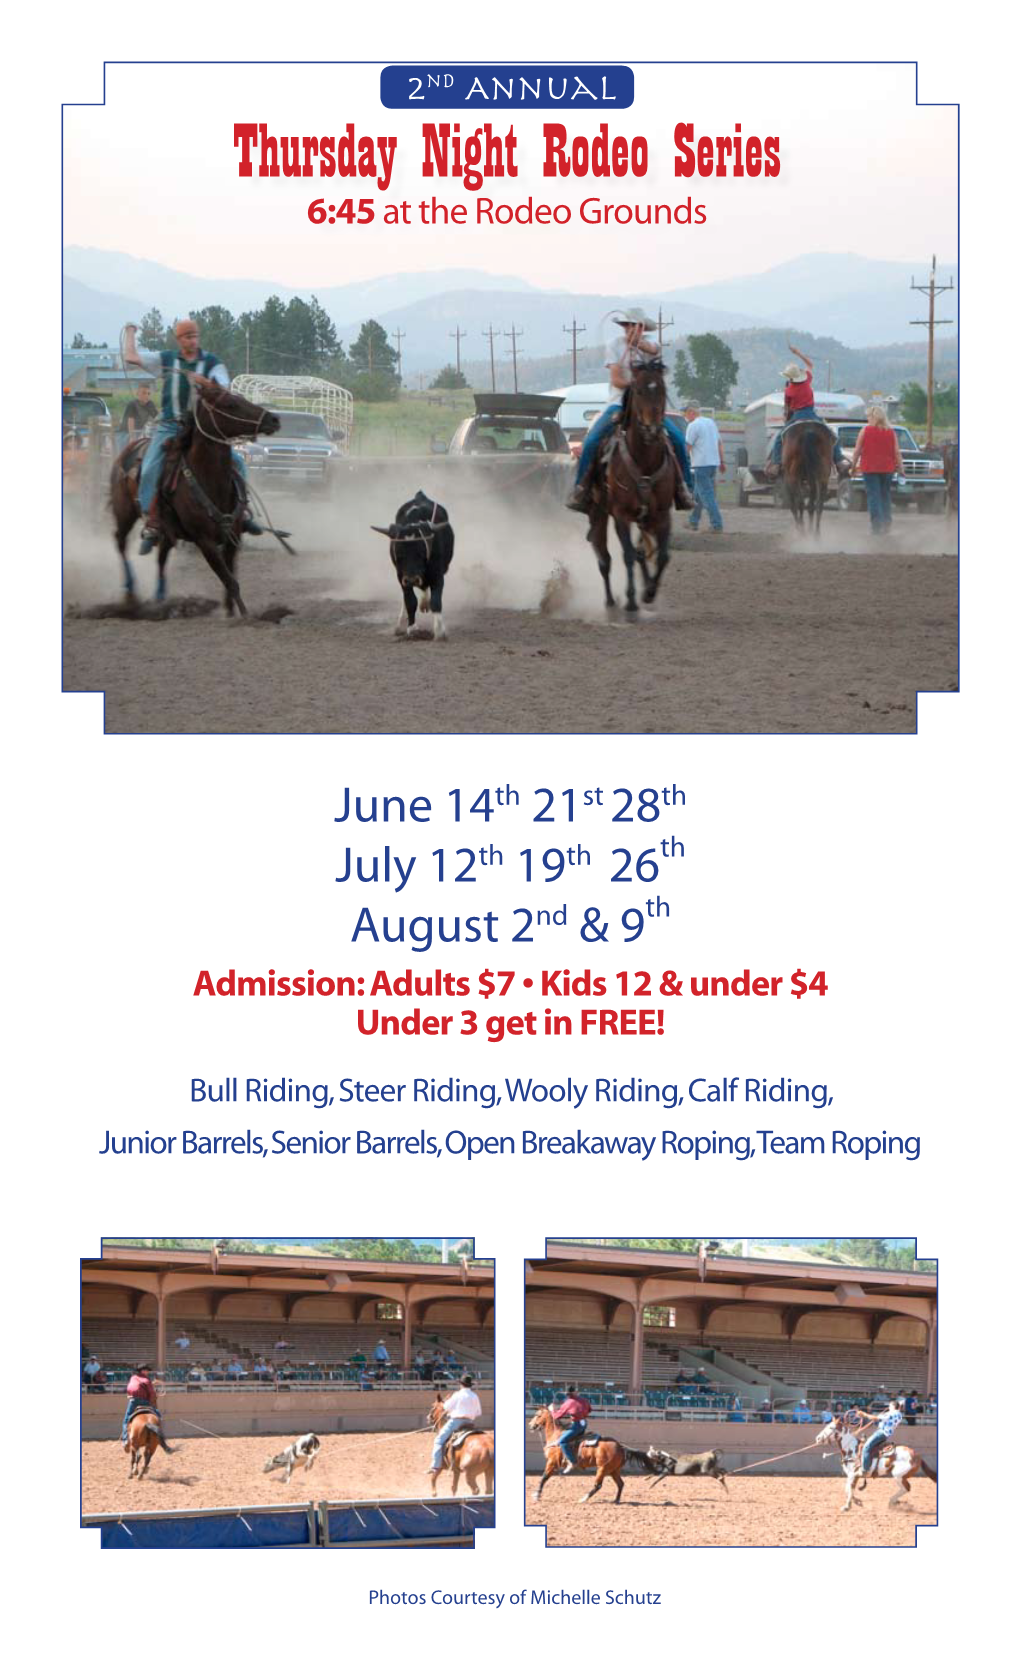 Thursday Night Rodeo Series 6:45 at the Rodeo Grounds